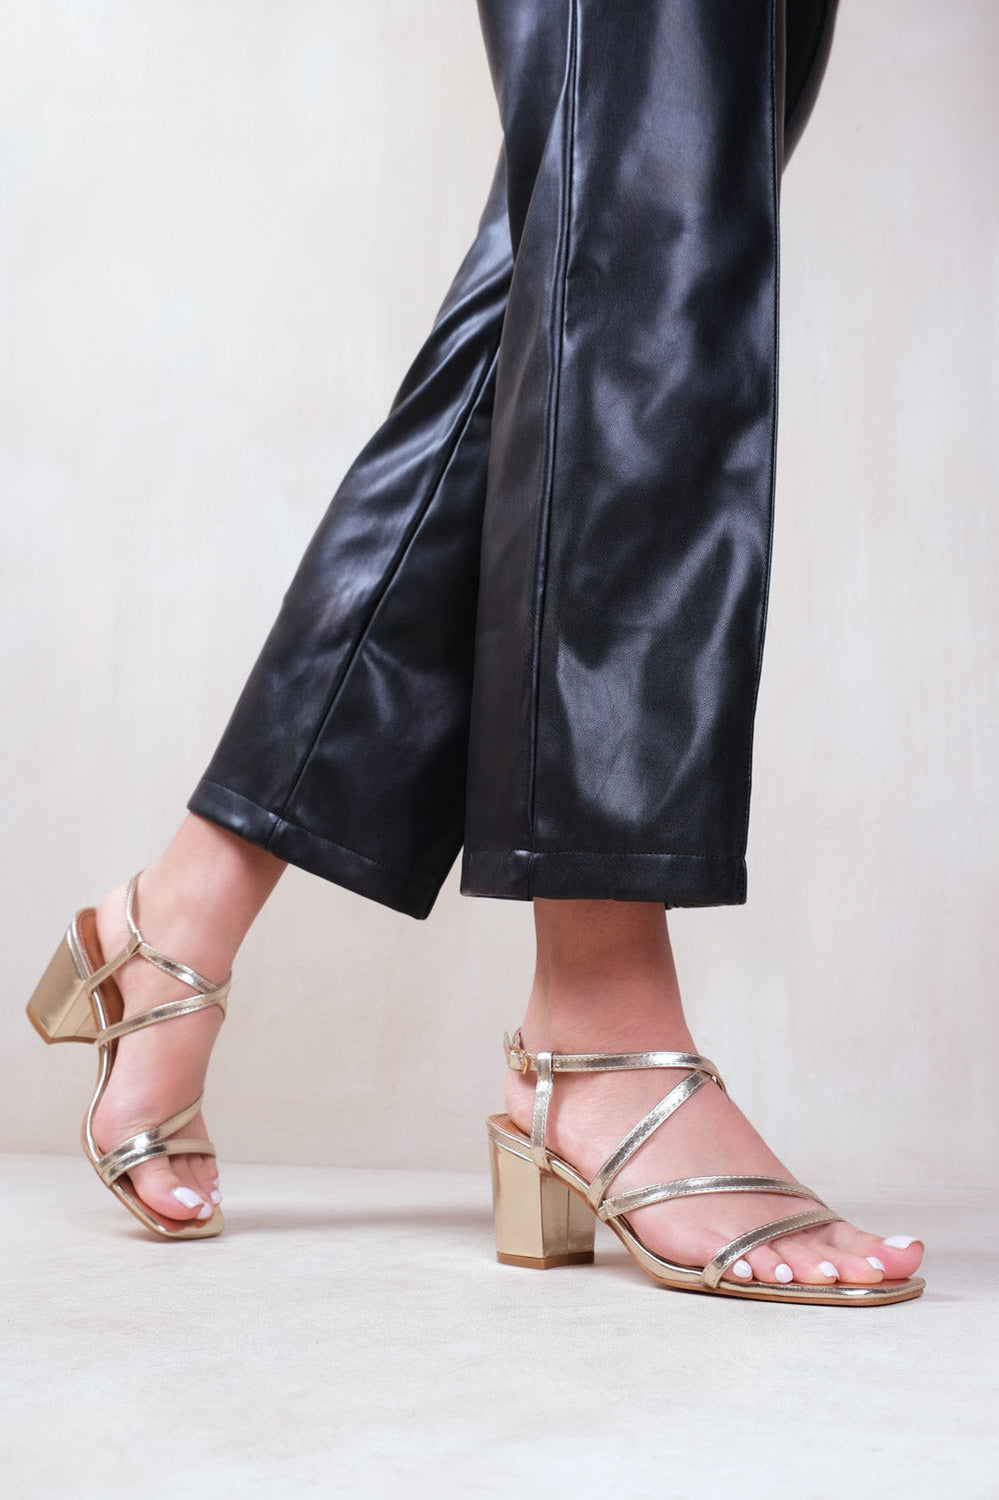 SIDRA EXTRA WIDE FIT MID HIGH BLOCK HEEL SANDALS WITH CROSS OVER STRAP IN GOLD METALLIC FAUX LEATHER